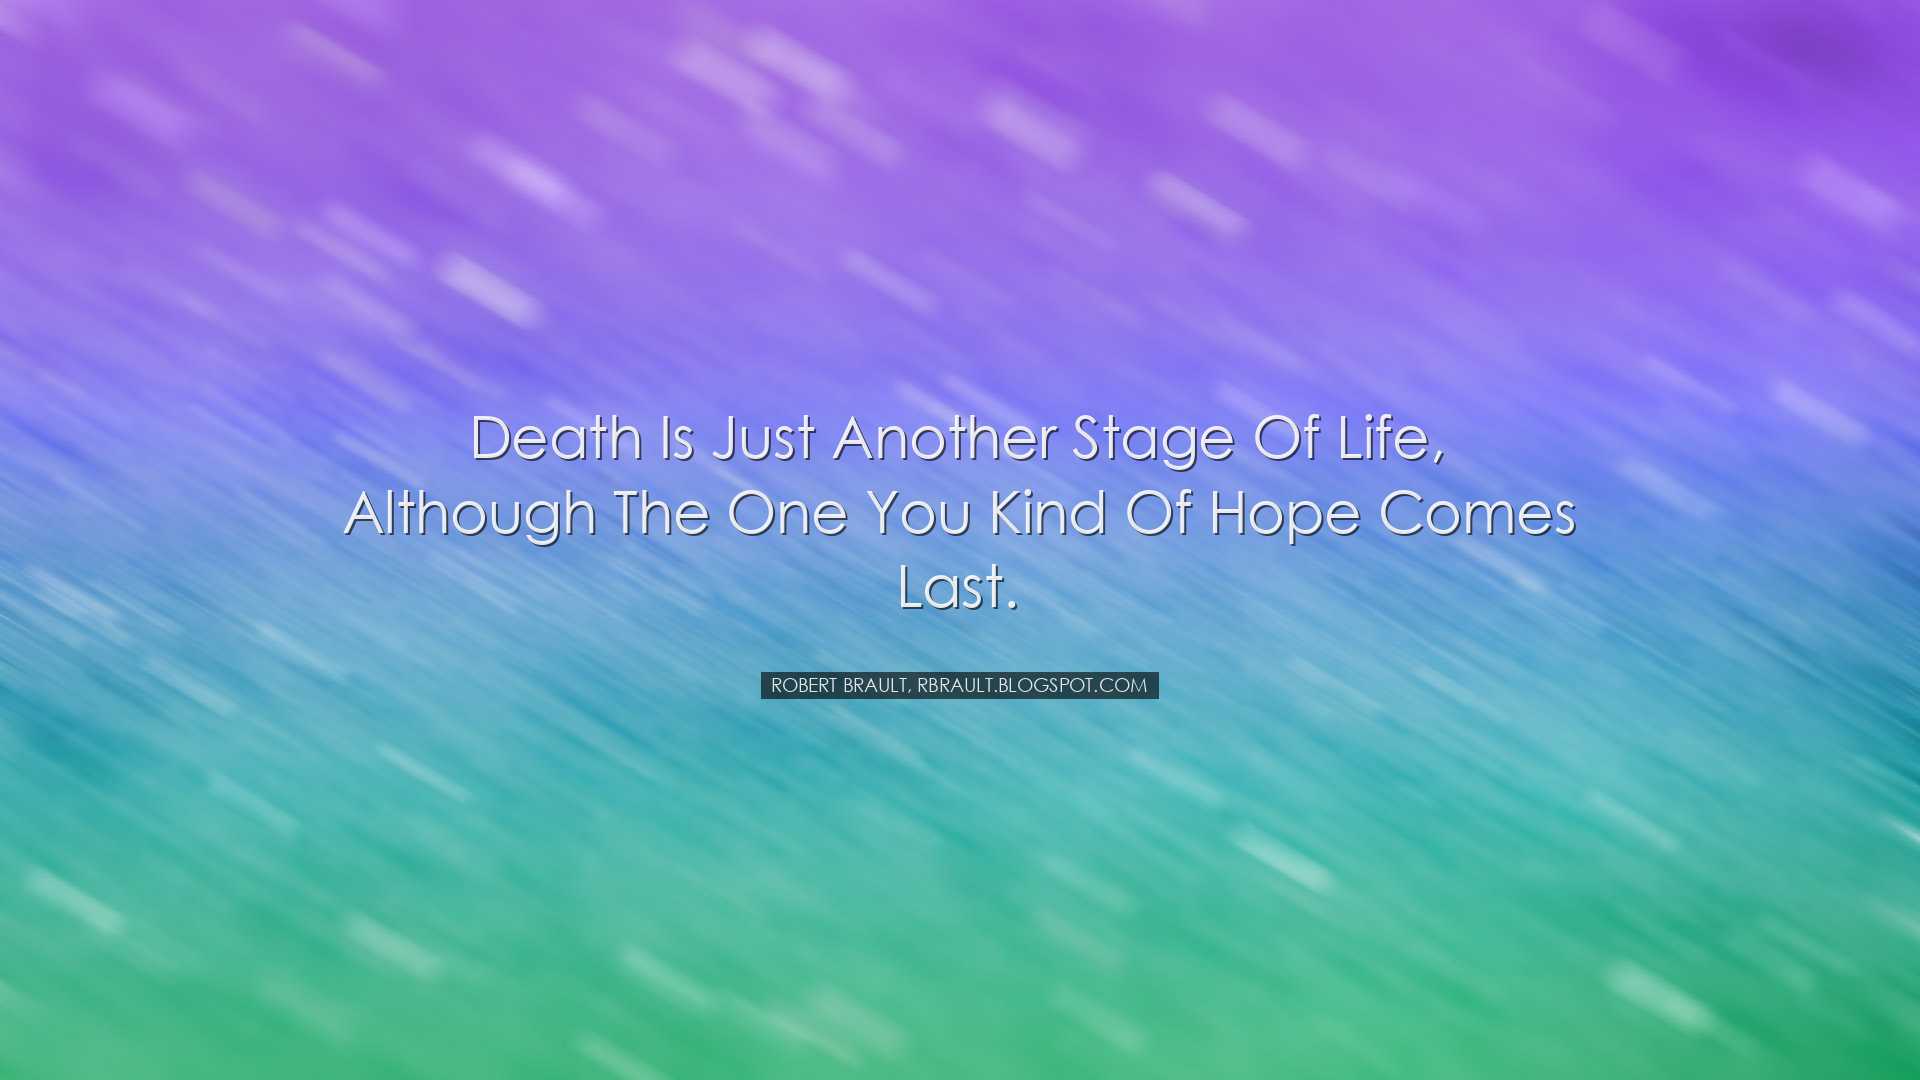 Death is just another stage of life, although the one you kind of